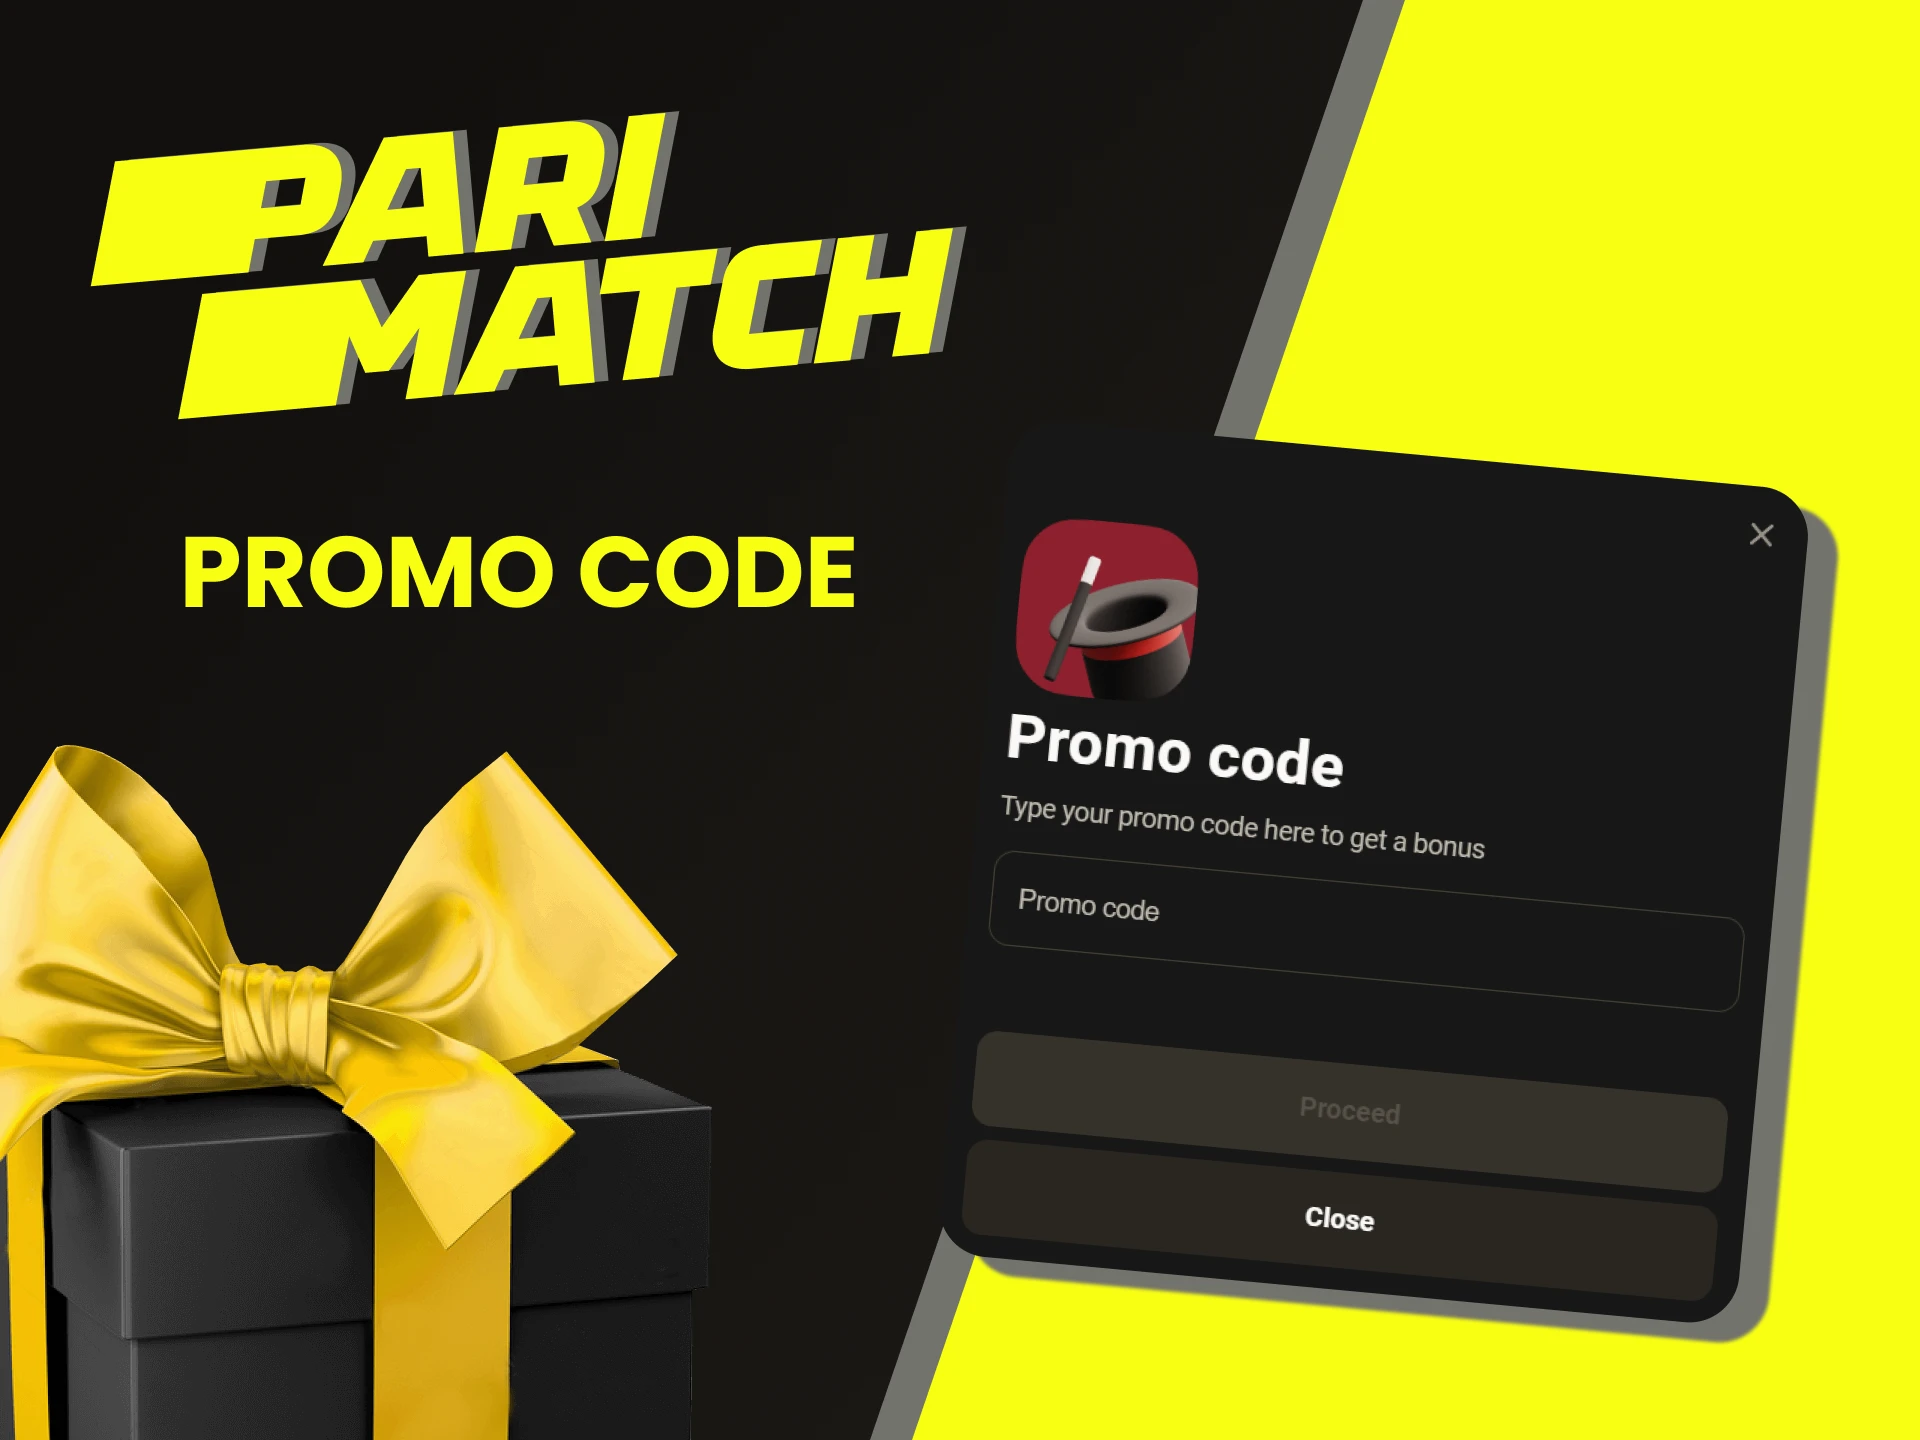 On the Parimatch website you can use a bonus promotional code.